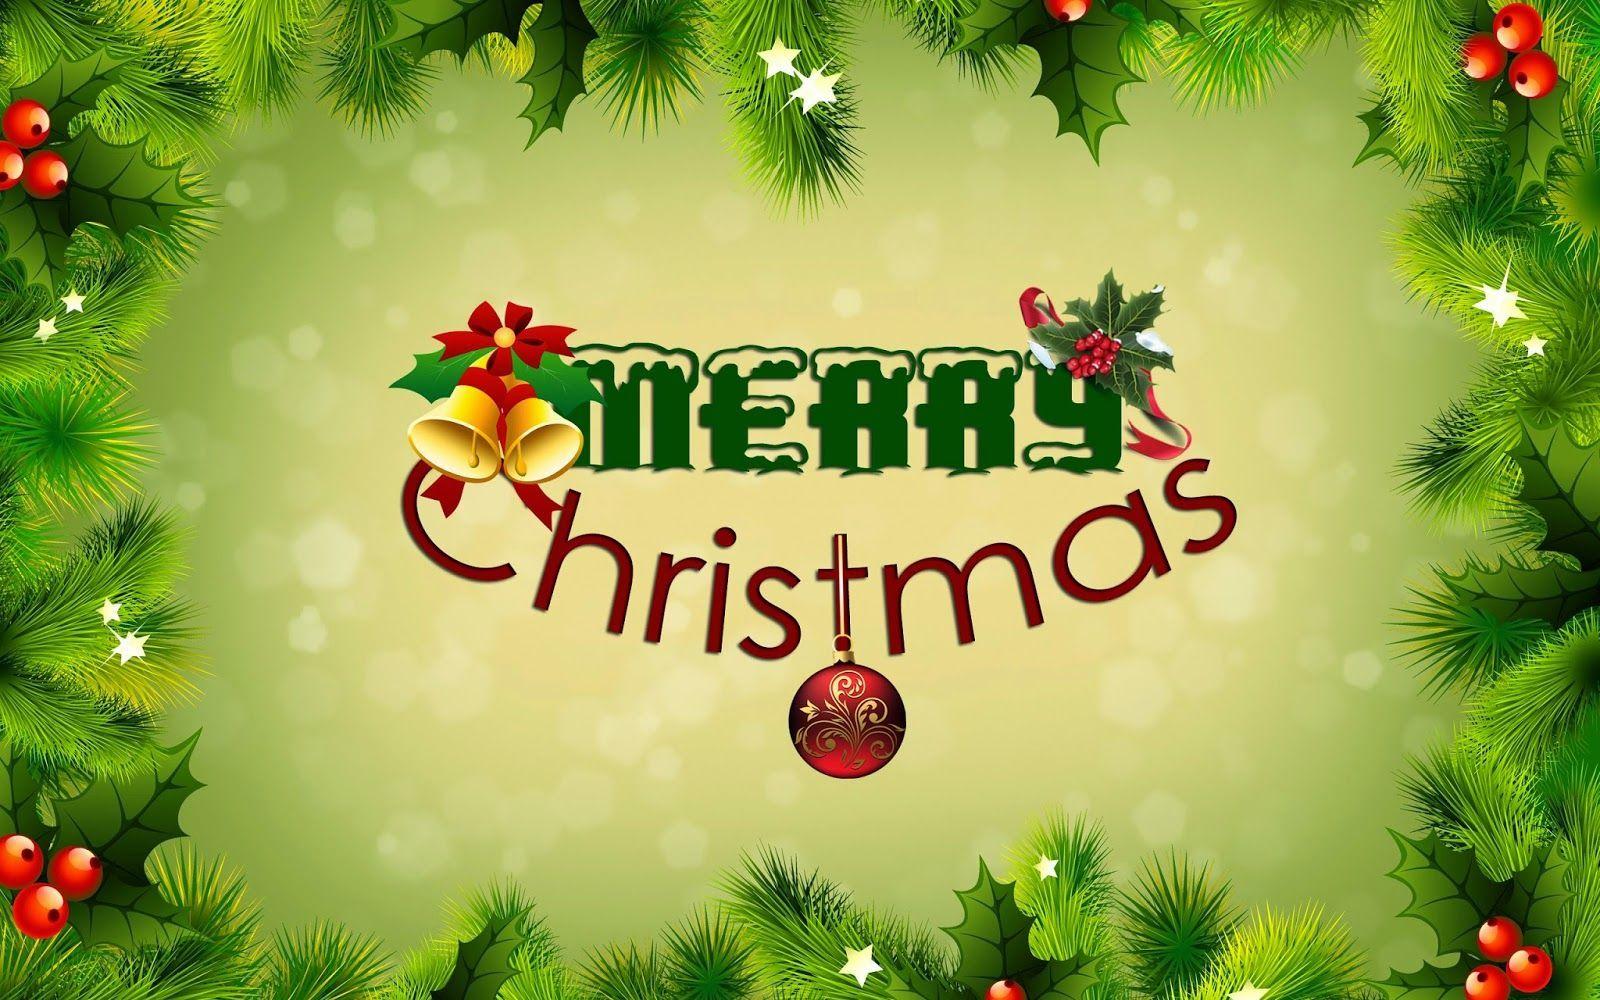 Happy Merry Christmas Image, 1080p HD wallpaper. Get the latest